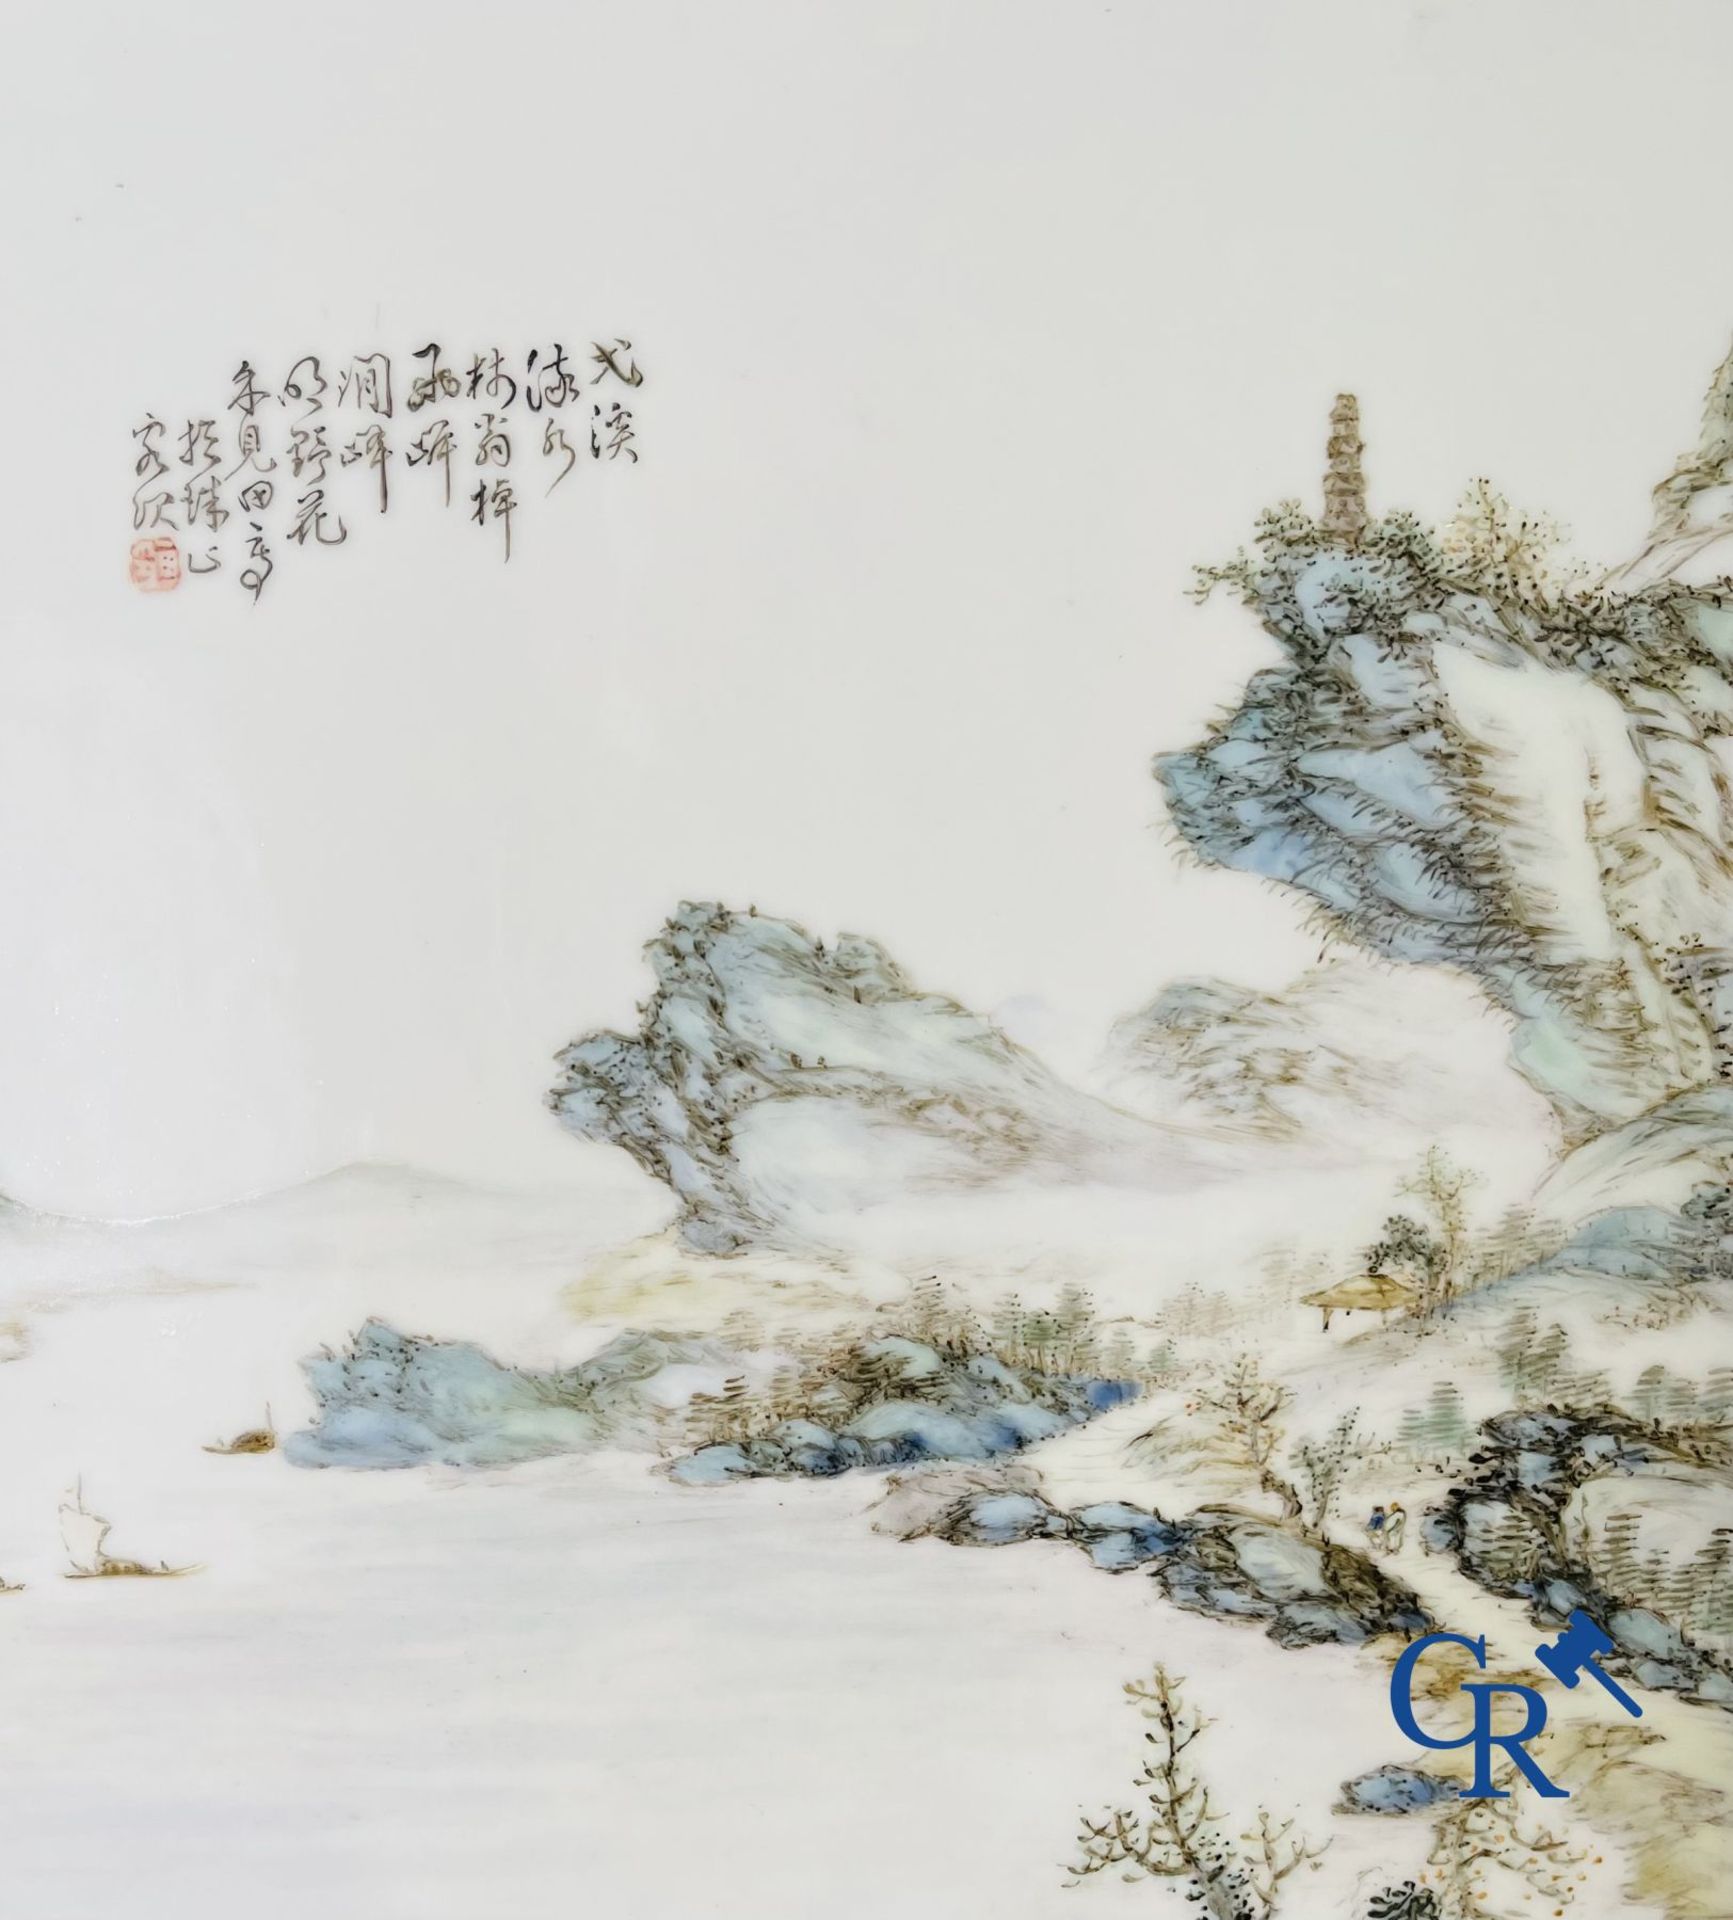 Chinese porcelain: A Chinese qianjiang cai porcelain painting in frame. - Image 4 of 13